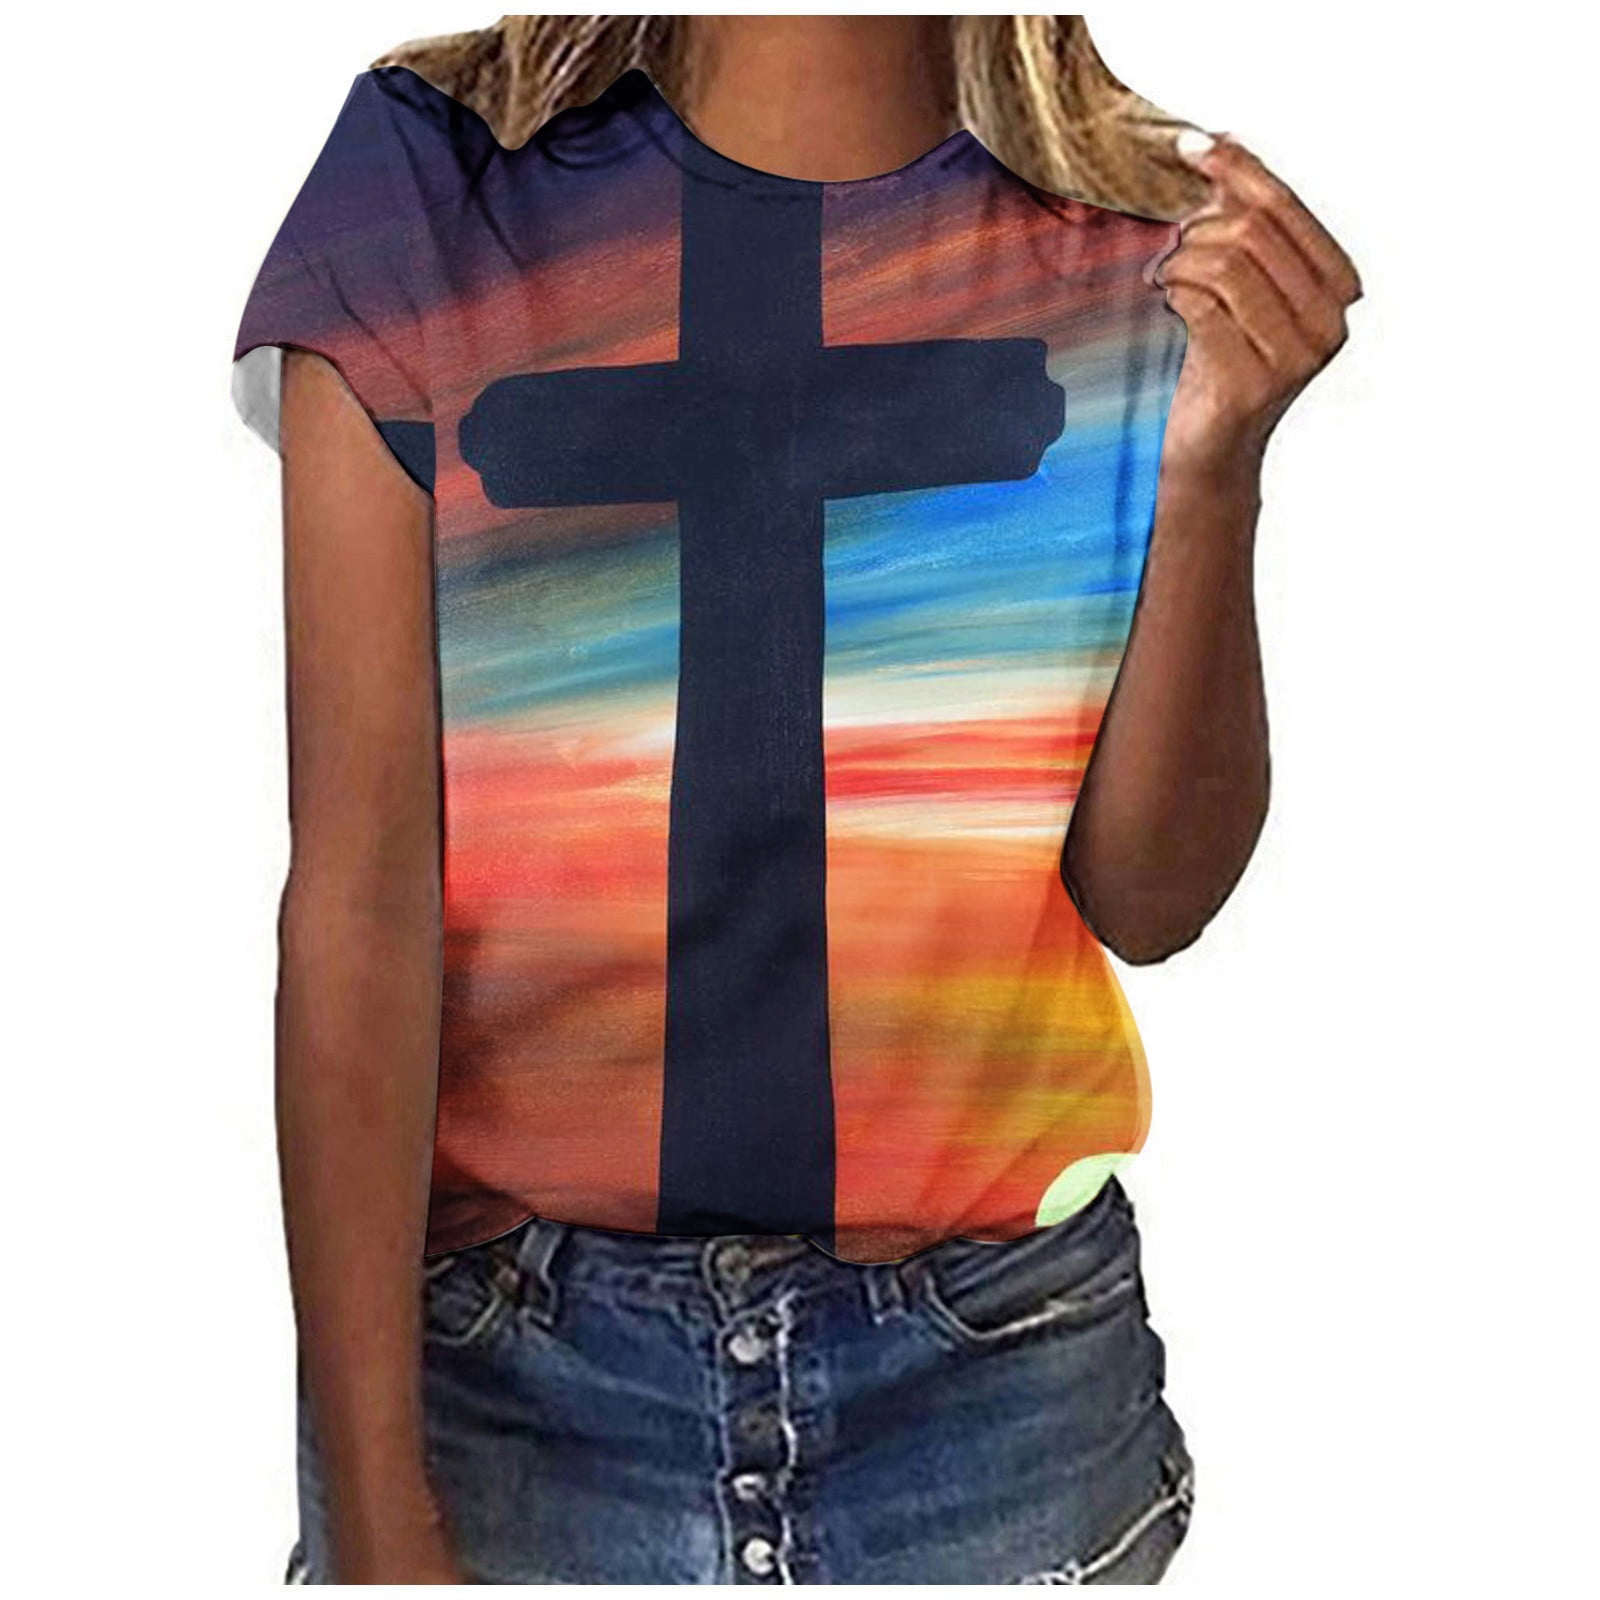 HAPIMO Women's Fashion Shirts Regular Fit Clothes for Girls Round Neck  T-shirt Comfy Casual Raglan Blouses Sunset Cross Print Tops Short Sleeve  Tees